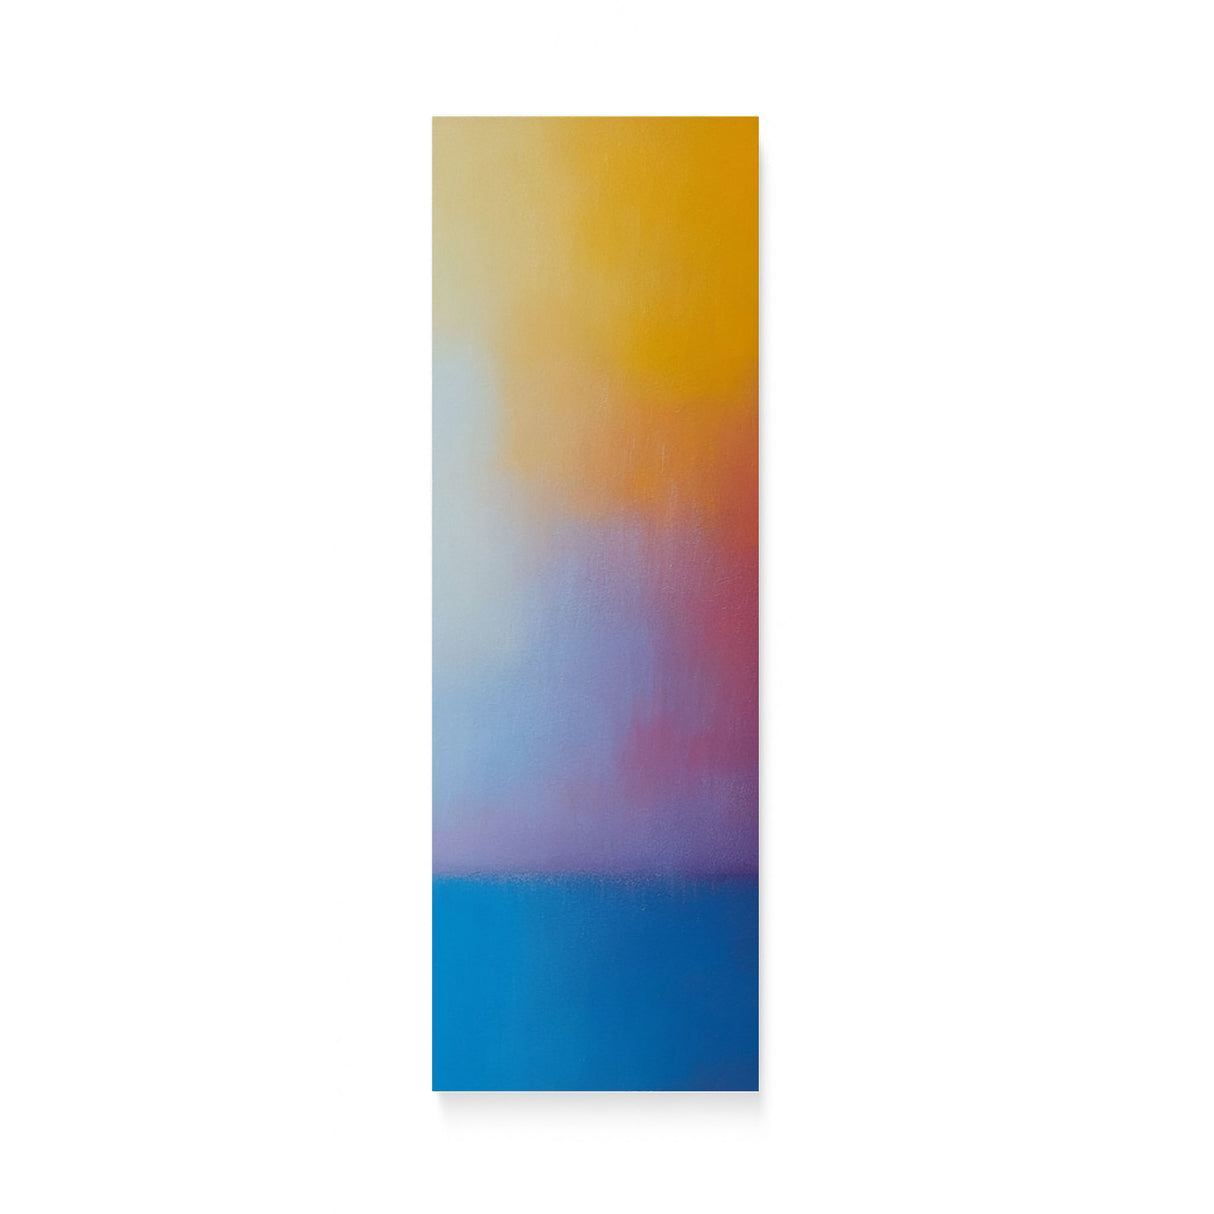 Colorful Bright Minimalist Canvas Wall Art {Less is More} Canvas Wall Art Sckribbles 10x30  